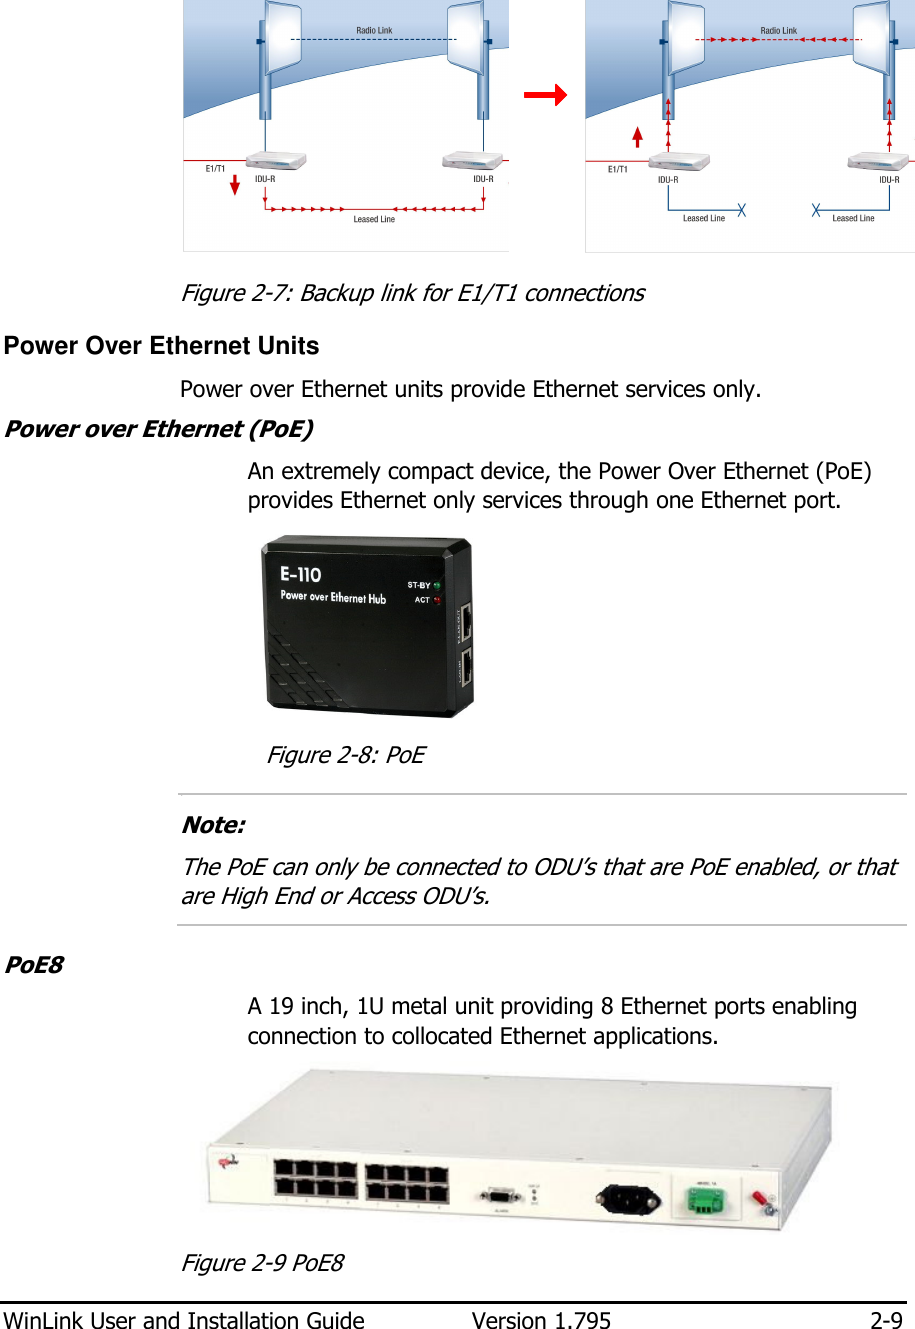  WinLink User and Installation Guide  Version 1.795  2-9      Figure  2-7: Backup link for E1/T1 connections Power Over Ethernet Units Power over Ethernet units provide Ethernet services only. Power over Ethernet (PoE)  An extremely compact device, the Power Over Ethernet (PoE) provides Ethernet only services through one Ethernet port.   Figure  2-8: PoE 1.  Note:  The PoE can only be connected to ODU’s that are PoE enabled, or that are High End or Access ODU’s.  PoE8 A 19 inch, 1U metal unit providing 8 Ethernet ports enabling connection to collocated Ethernet applications.  Figure  2-9 PoE8 